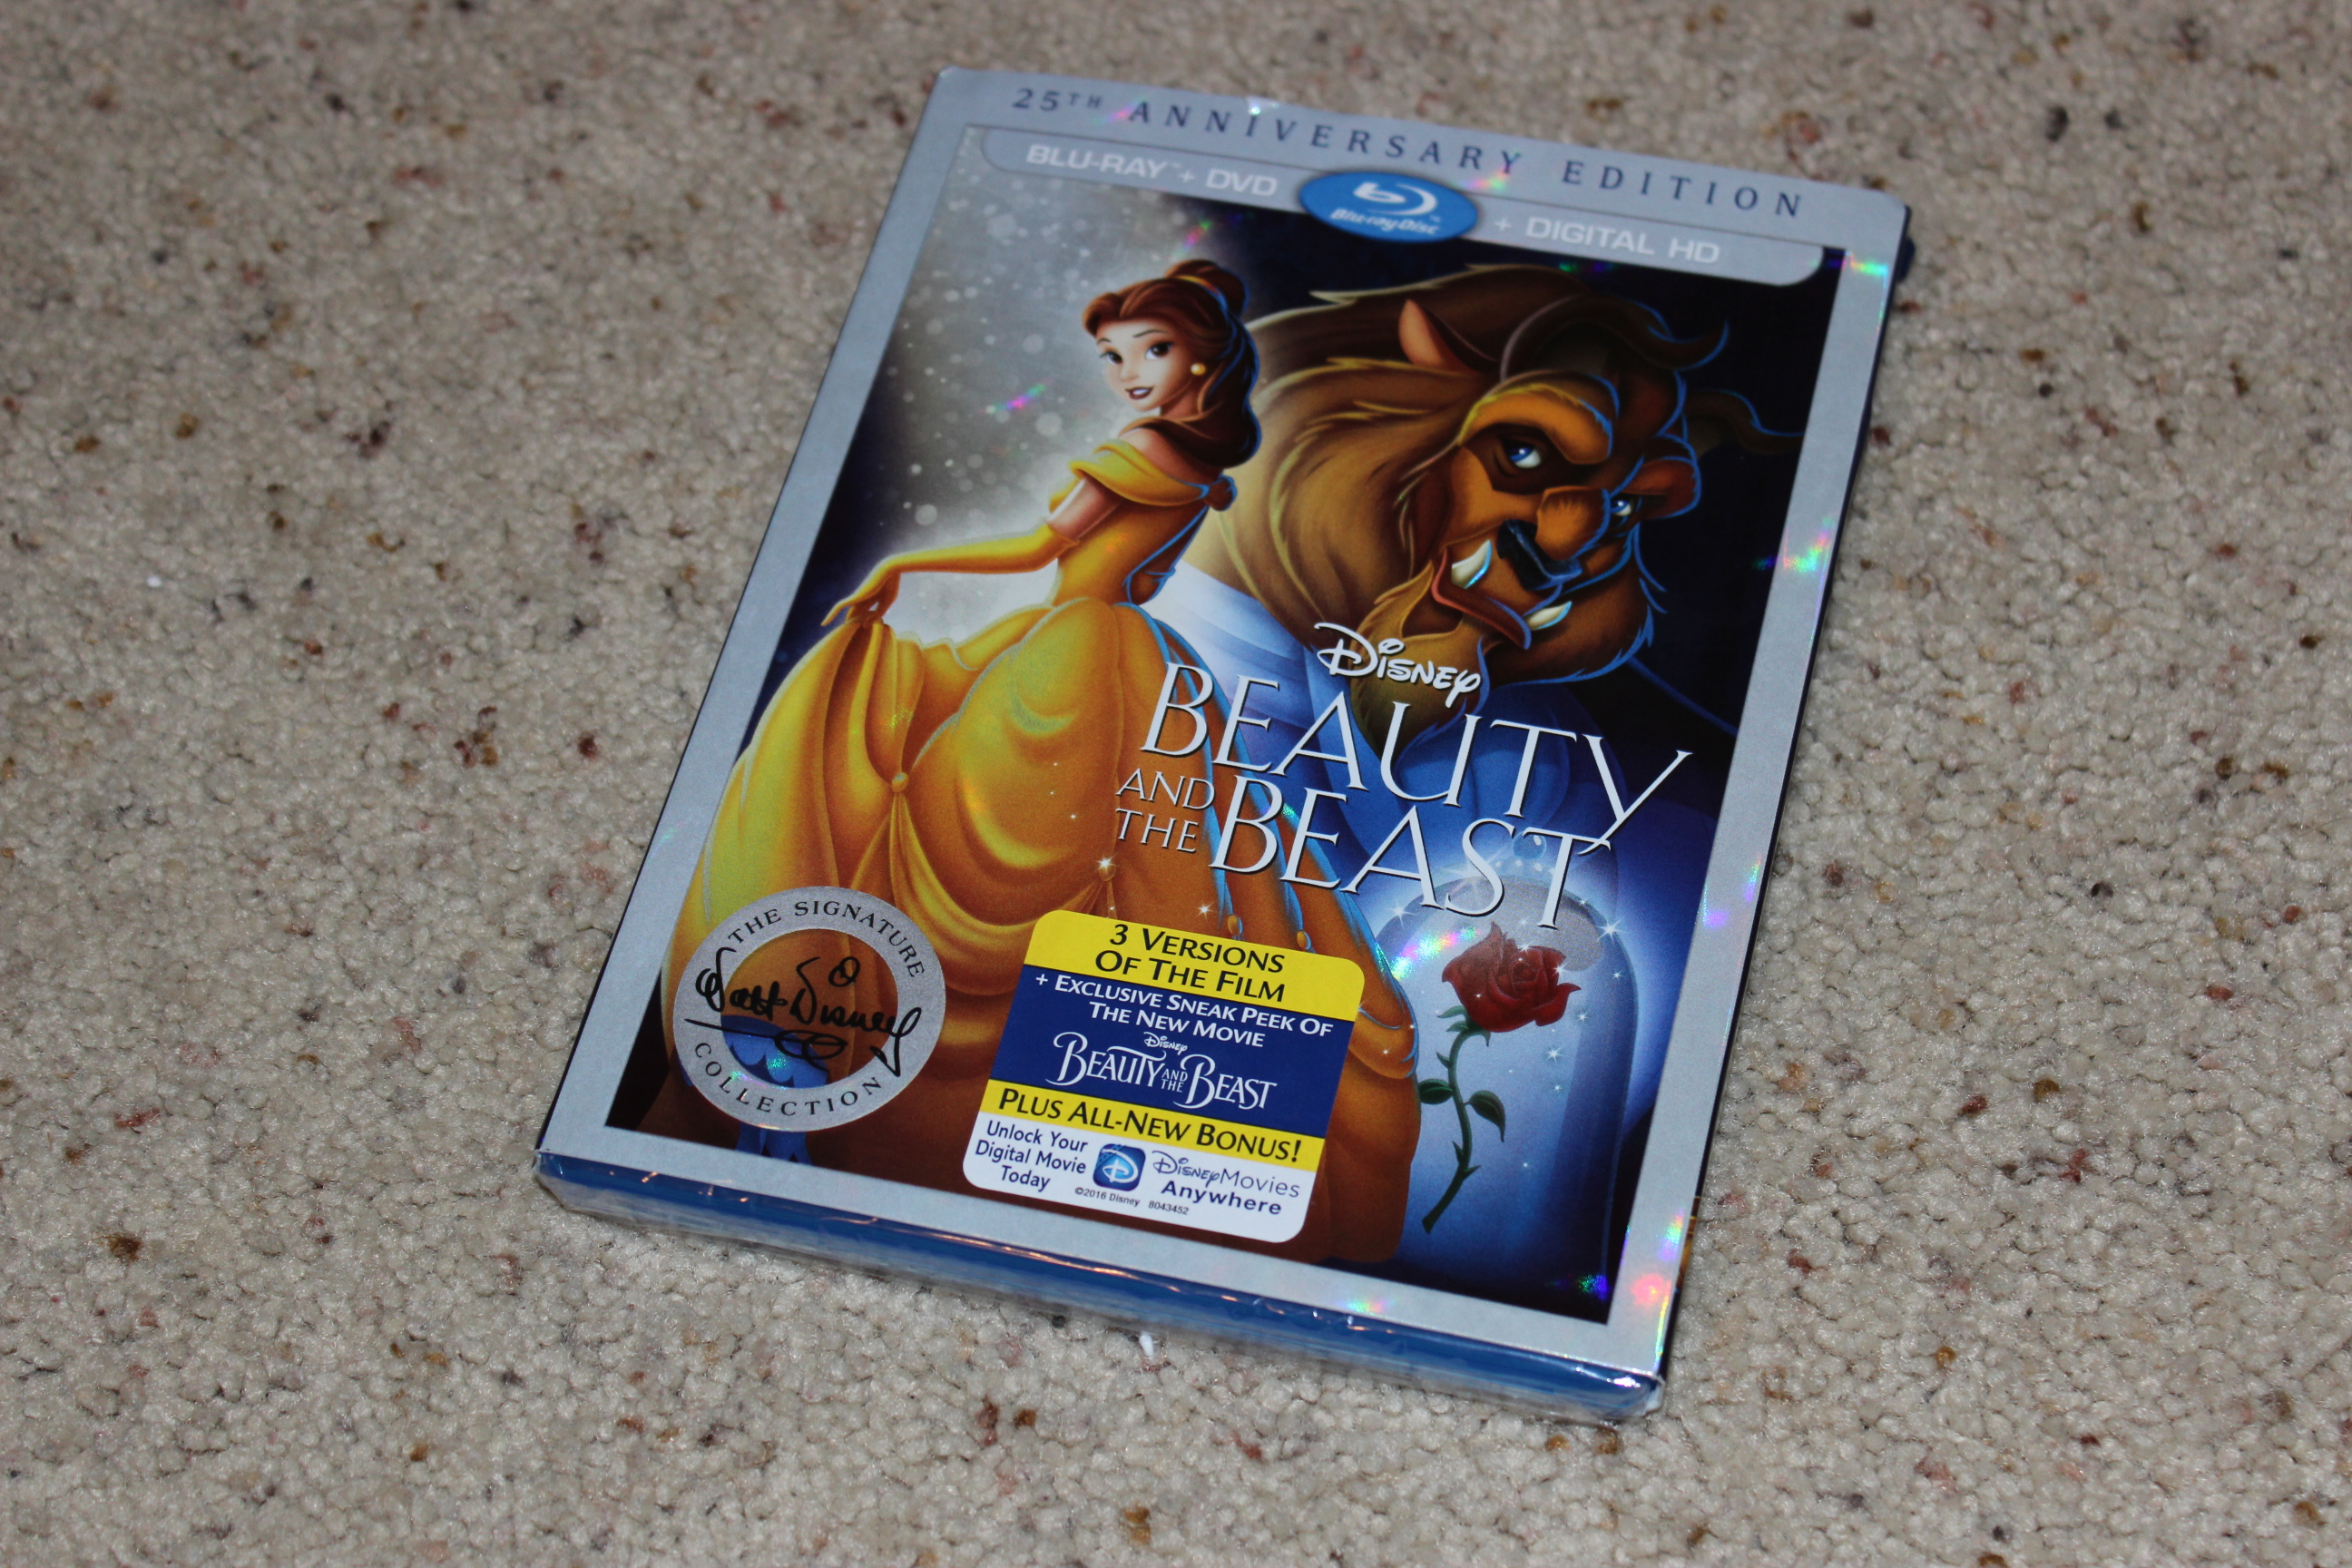 Beauty and the Beast 25th anniversary